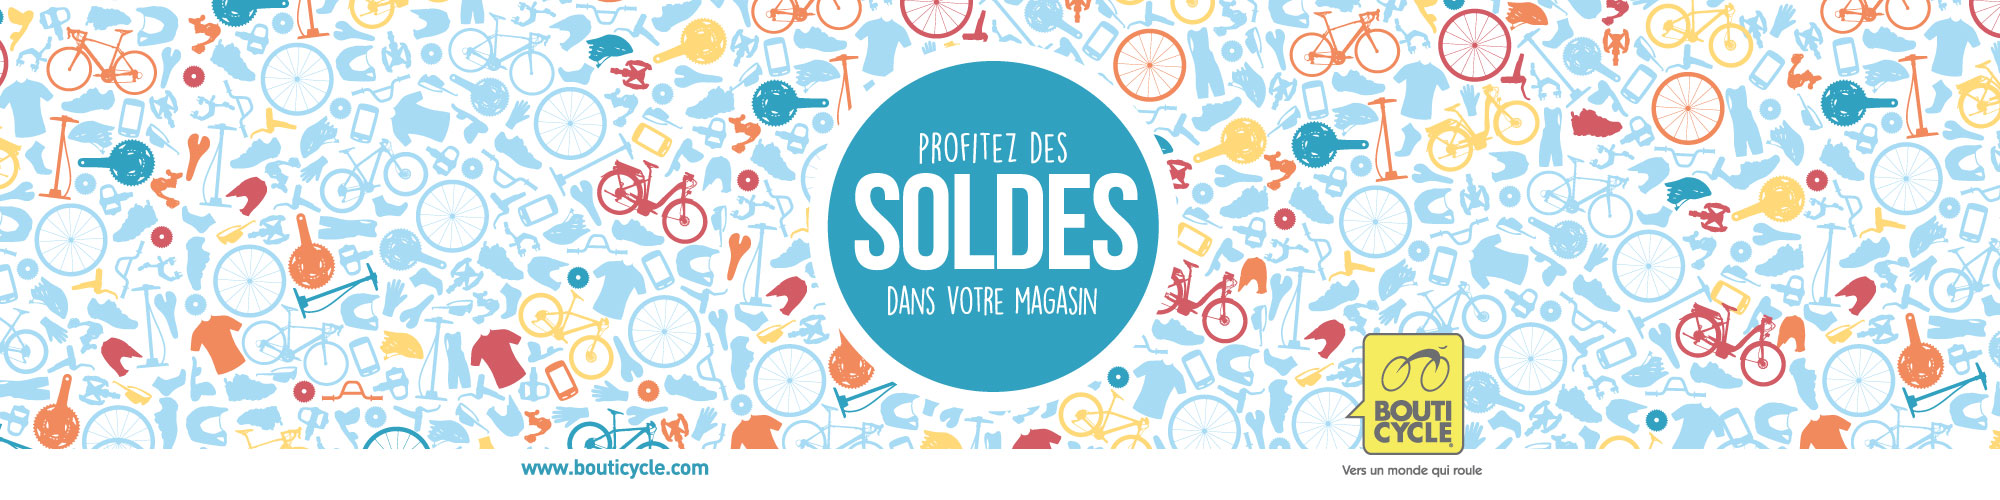 Soldes Bouticycle